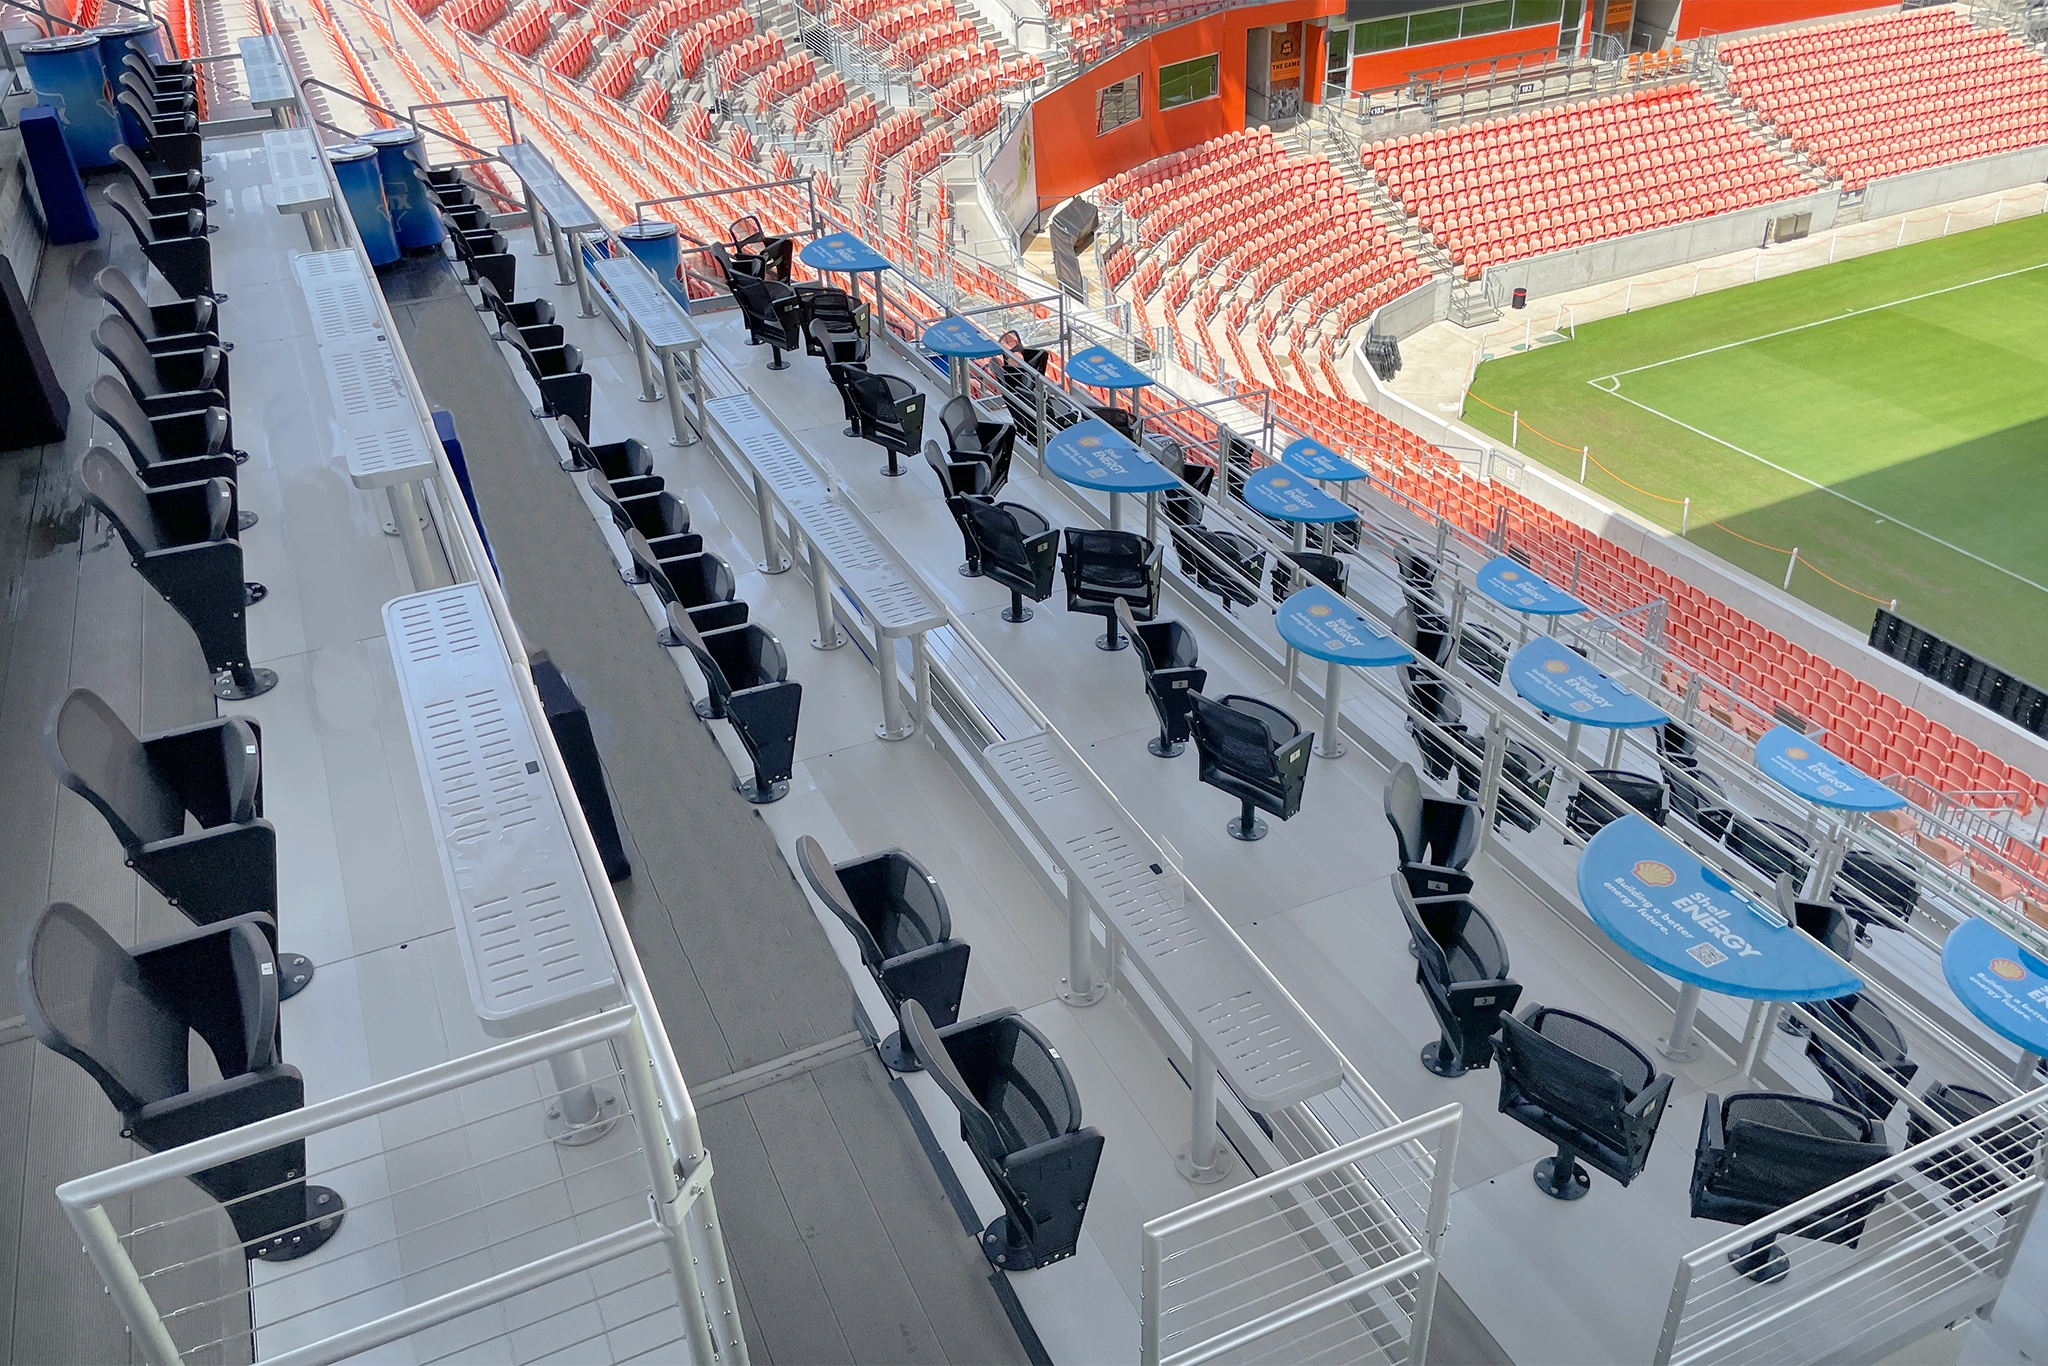 4 Topps Loges, Swivel Seats and Drink Railing at Houston Dynamo.